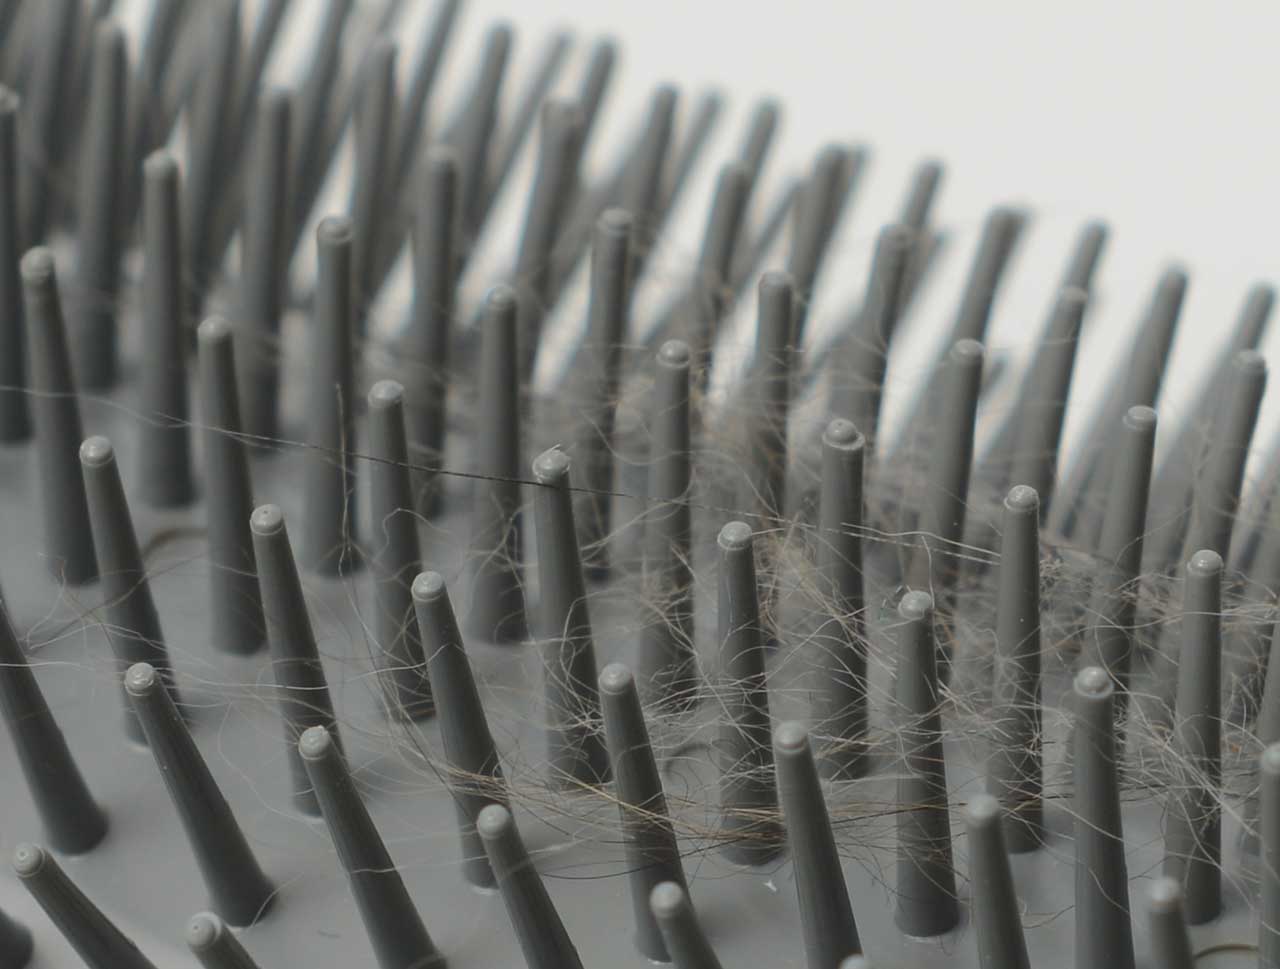 Flexible brush detangles your cat's coat and collects loose cat hairs